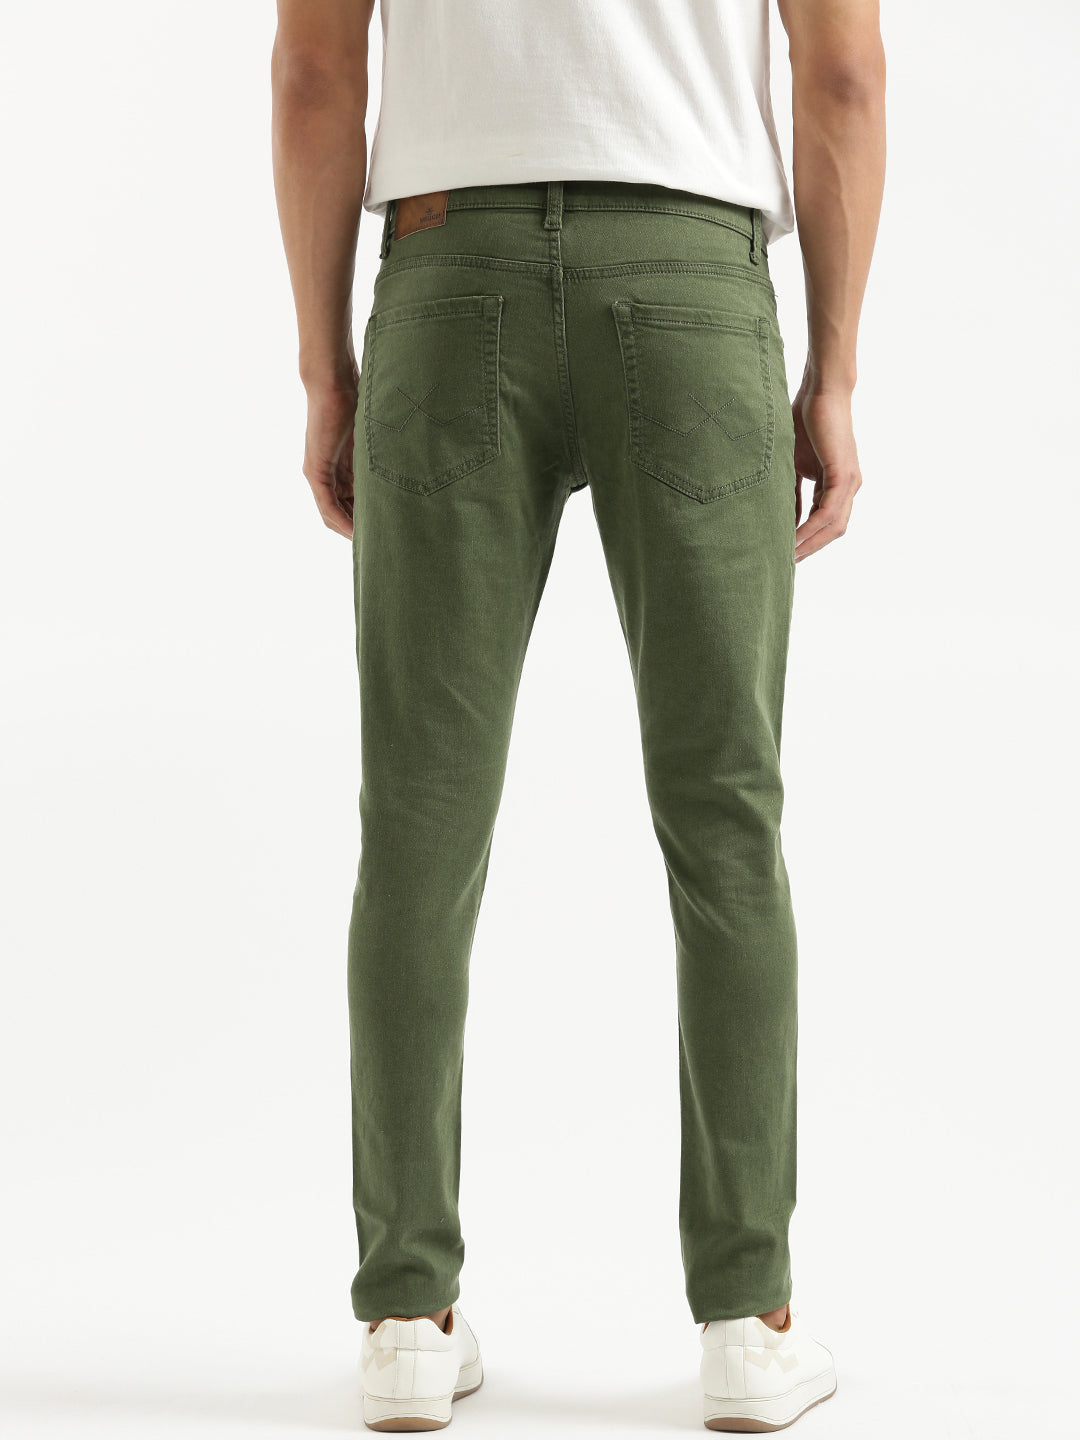 Olive Green Classic Jeans